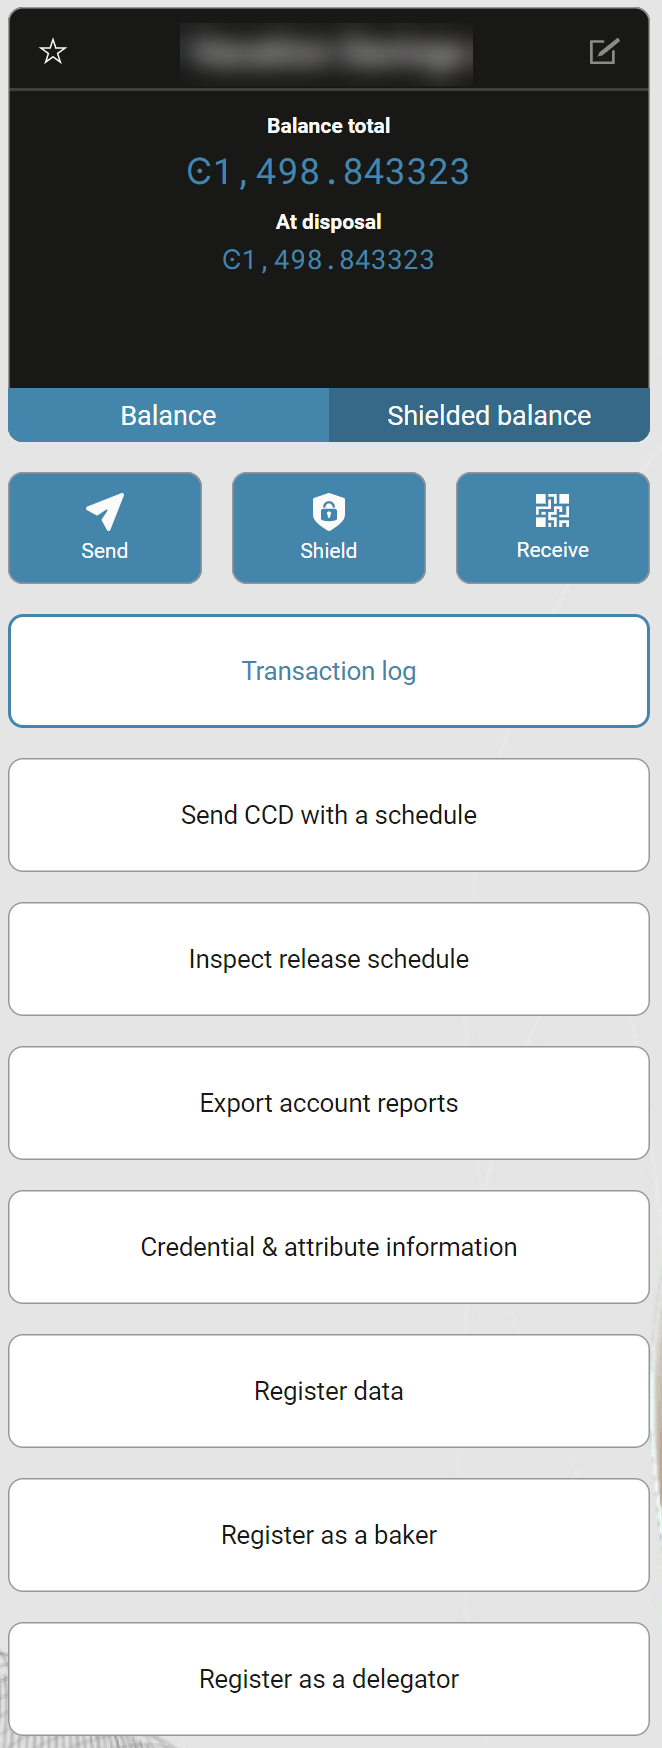 dark account balance area with actions shown on a gray area below that on rectangular buttons